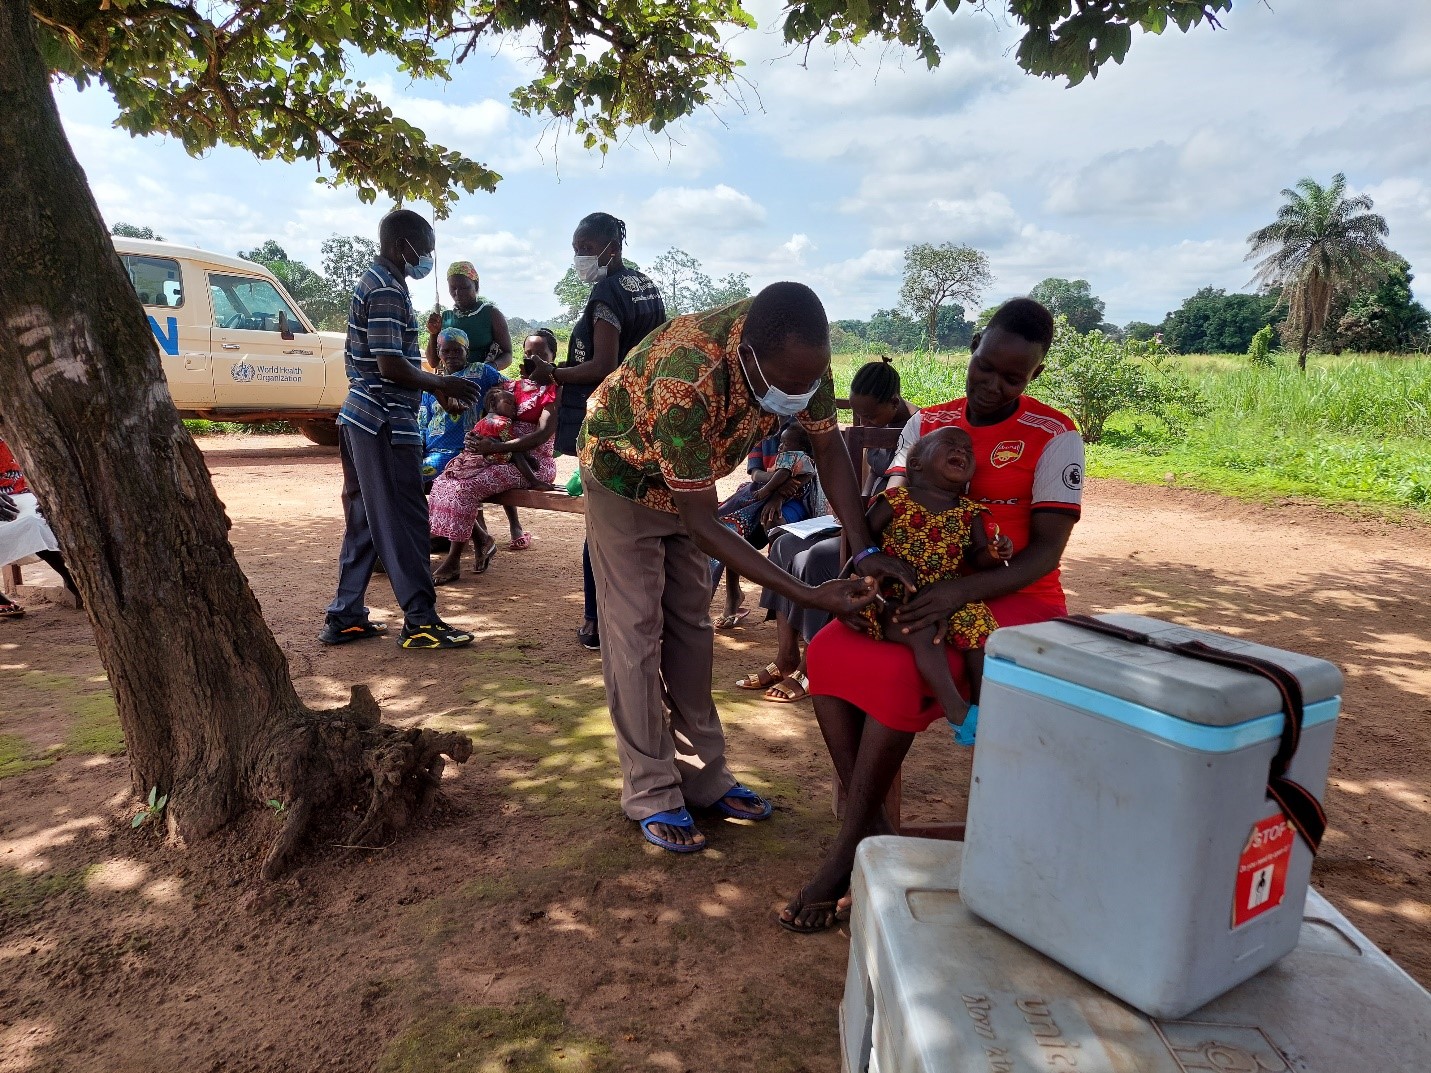 Children receiving vaccines under a tree in the hard-to-reach Nadiangere village in South Sudan